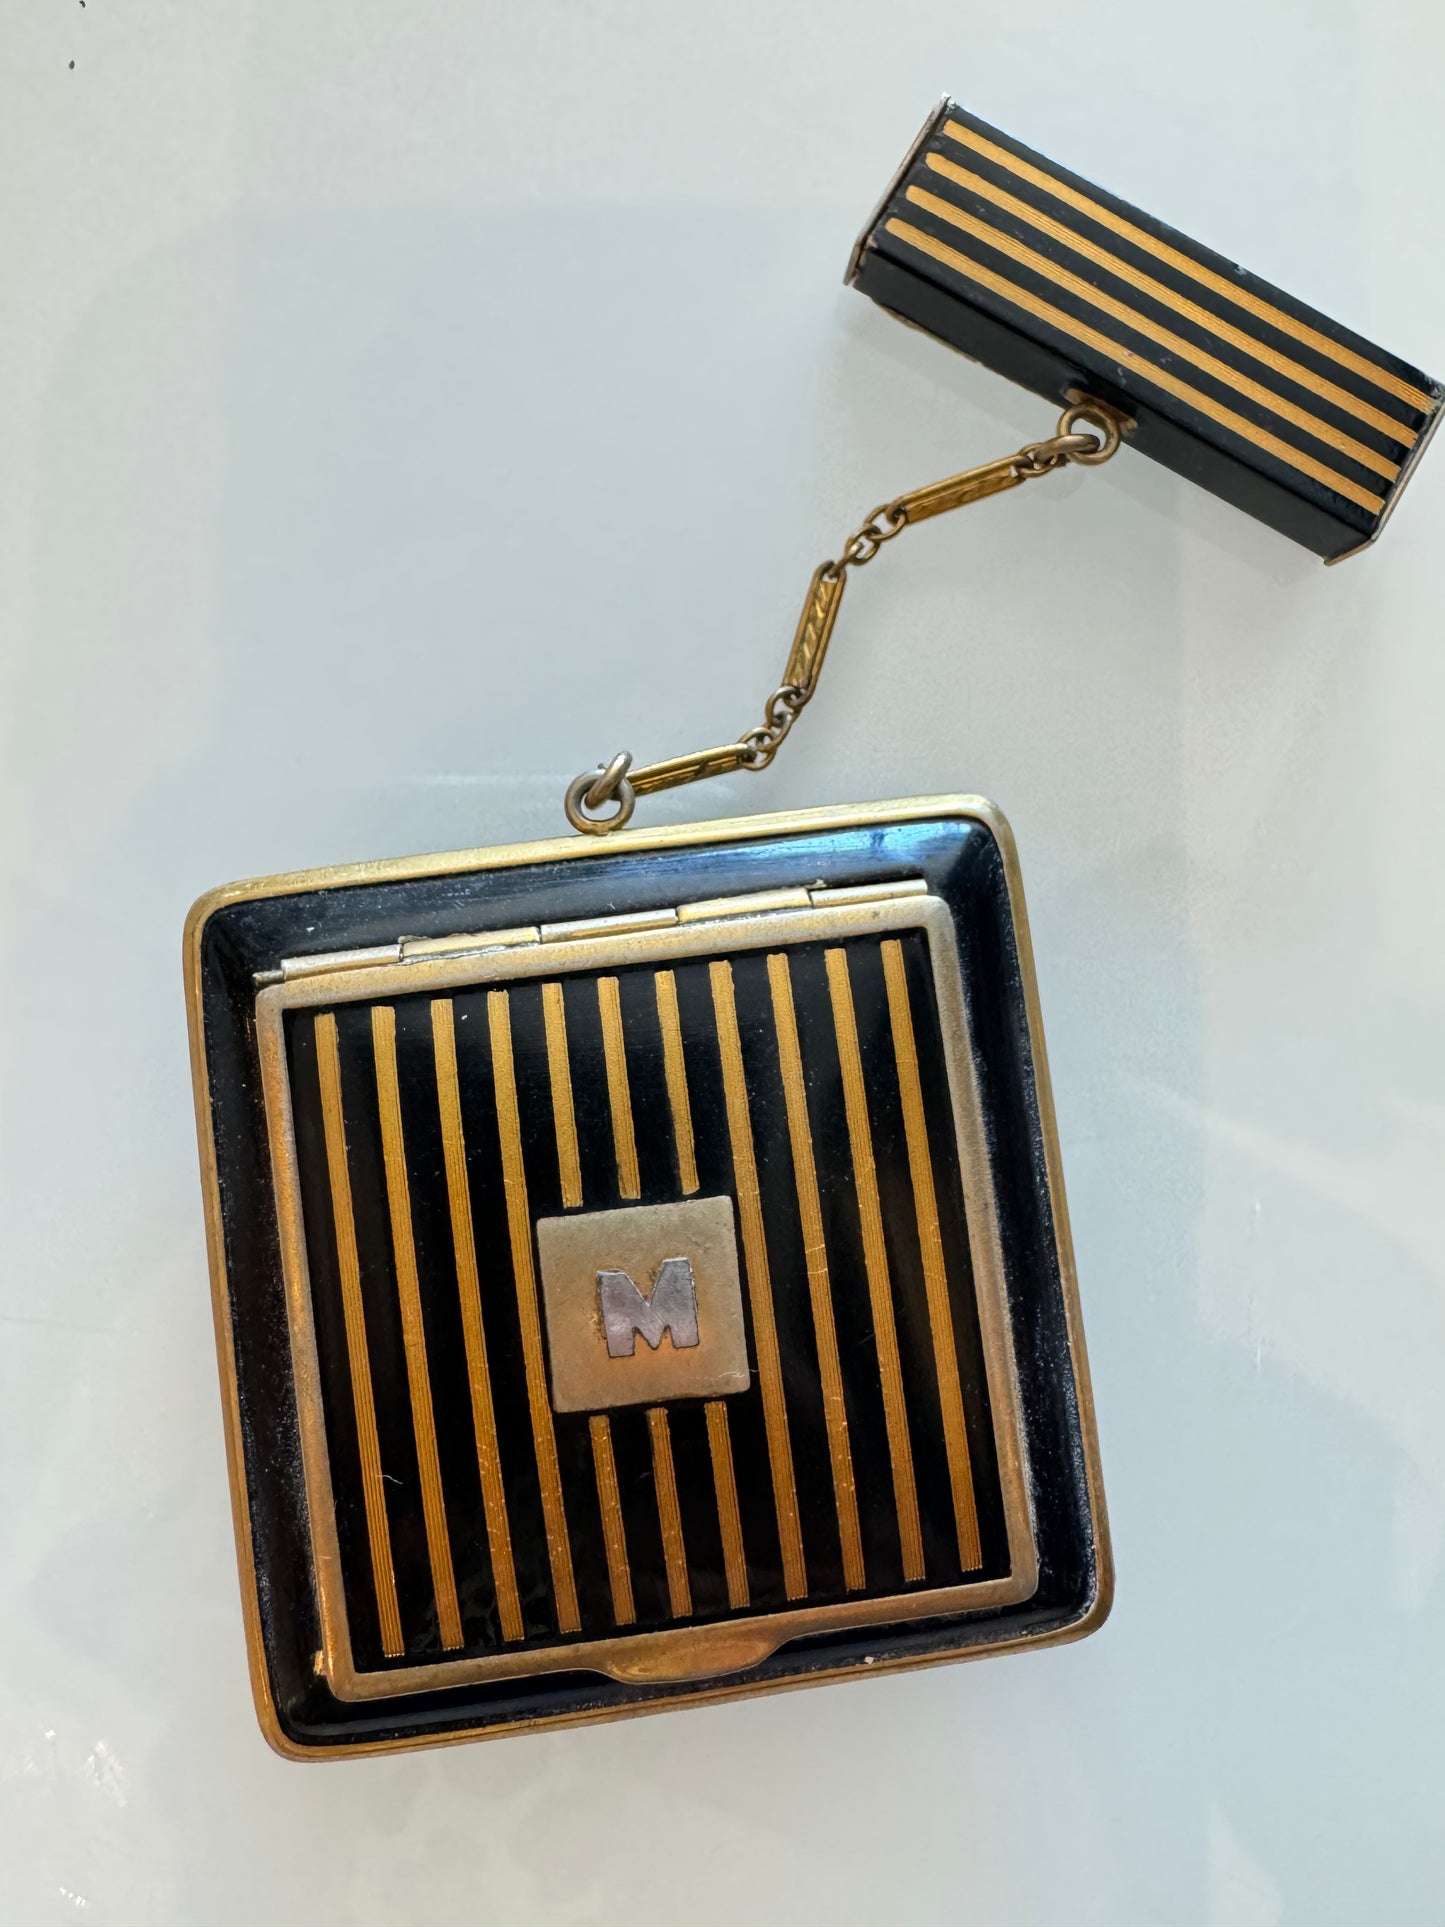 Enamel makeup compact with lipstick chain and initial "M" opens twice inside too